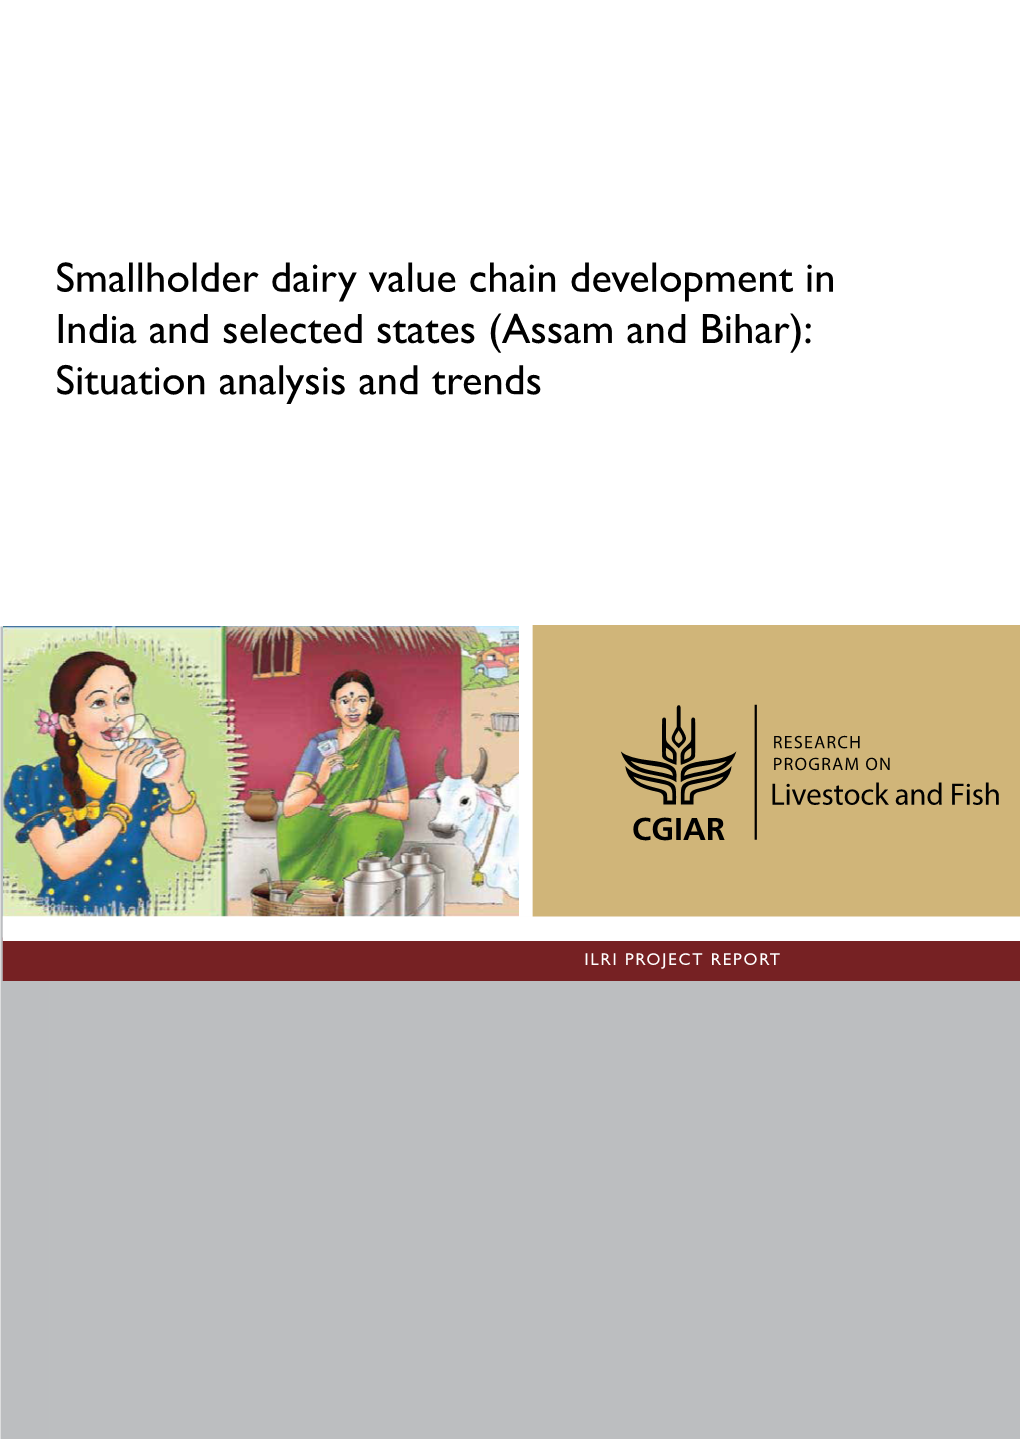 Smallholder Dairy Value Chain Development in India and Selected States (Assam and Bihar): Situation Analysis and Trends